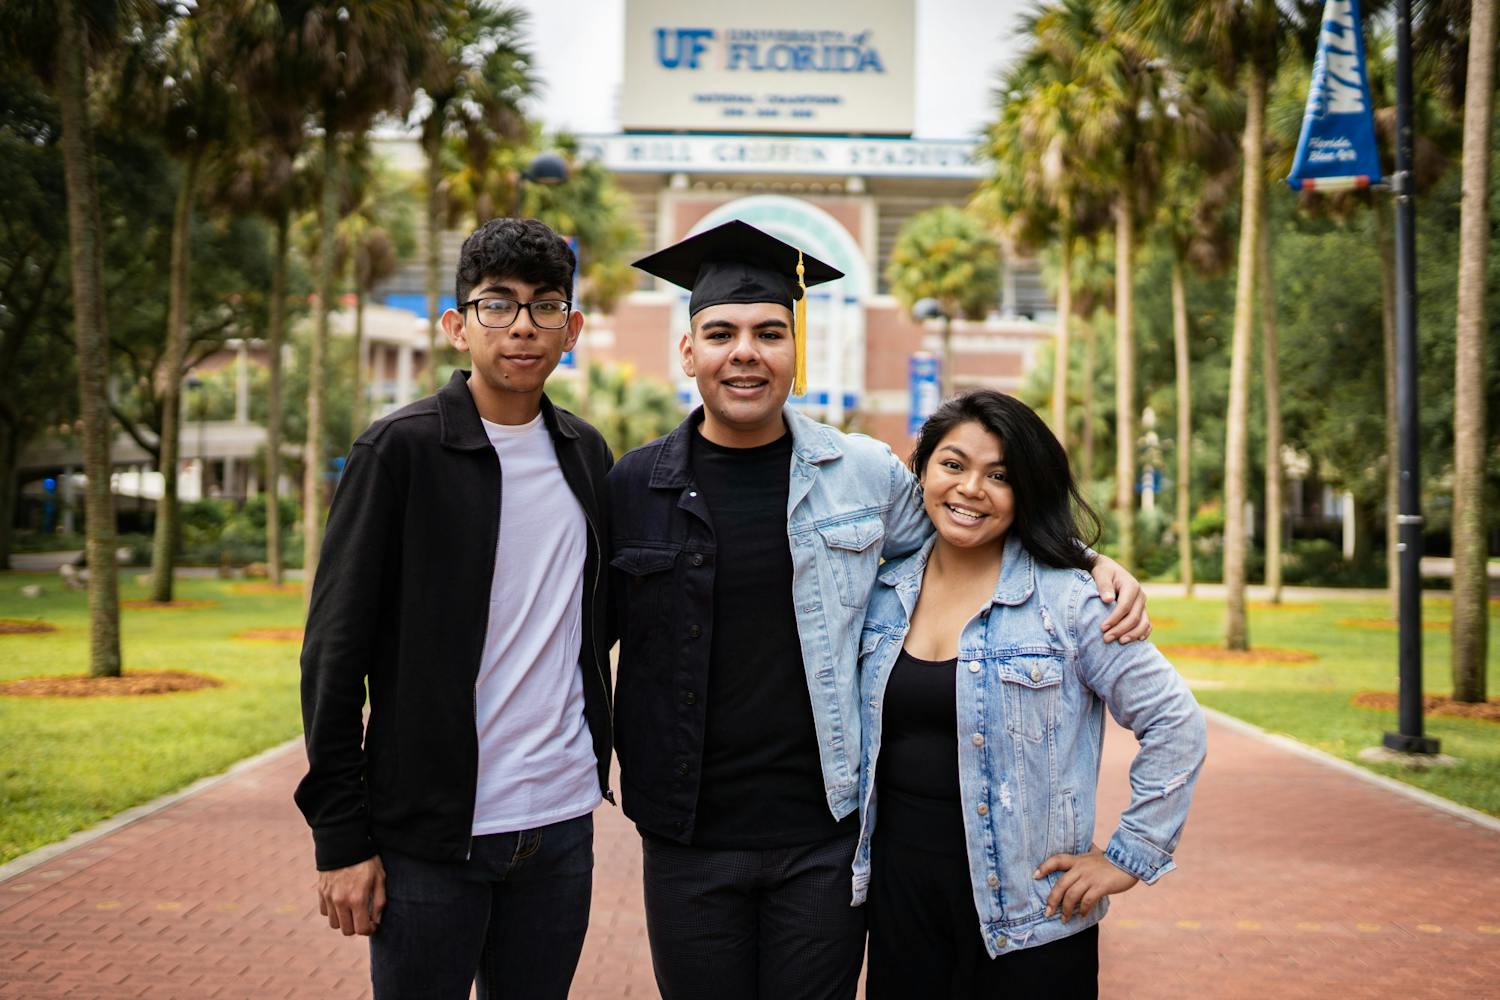 Jose Alvarez, center, and siblings David and Ismelda Alvarez, left and right, celebrate Jose’s graduation from the University of Florida in front of the Ben Hill Griffin Stadium. 